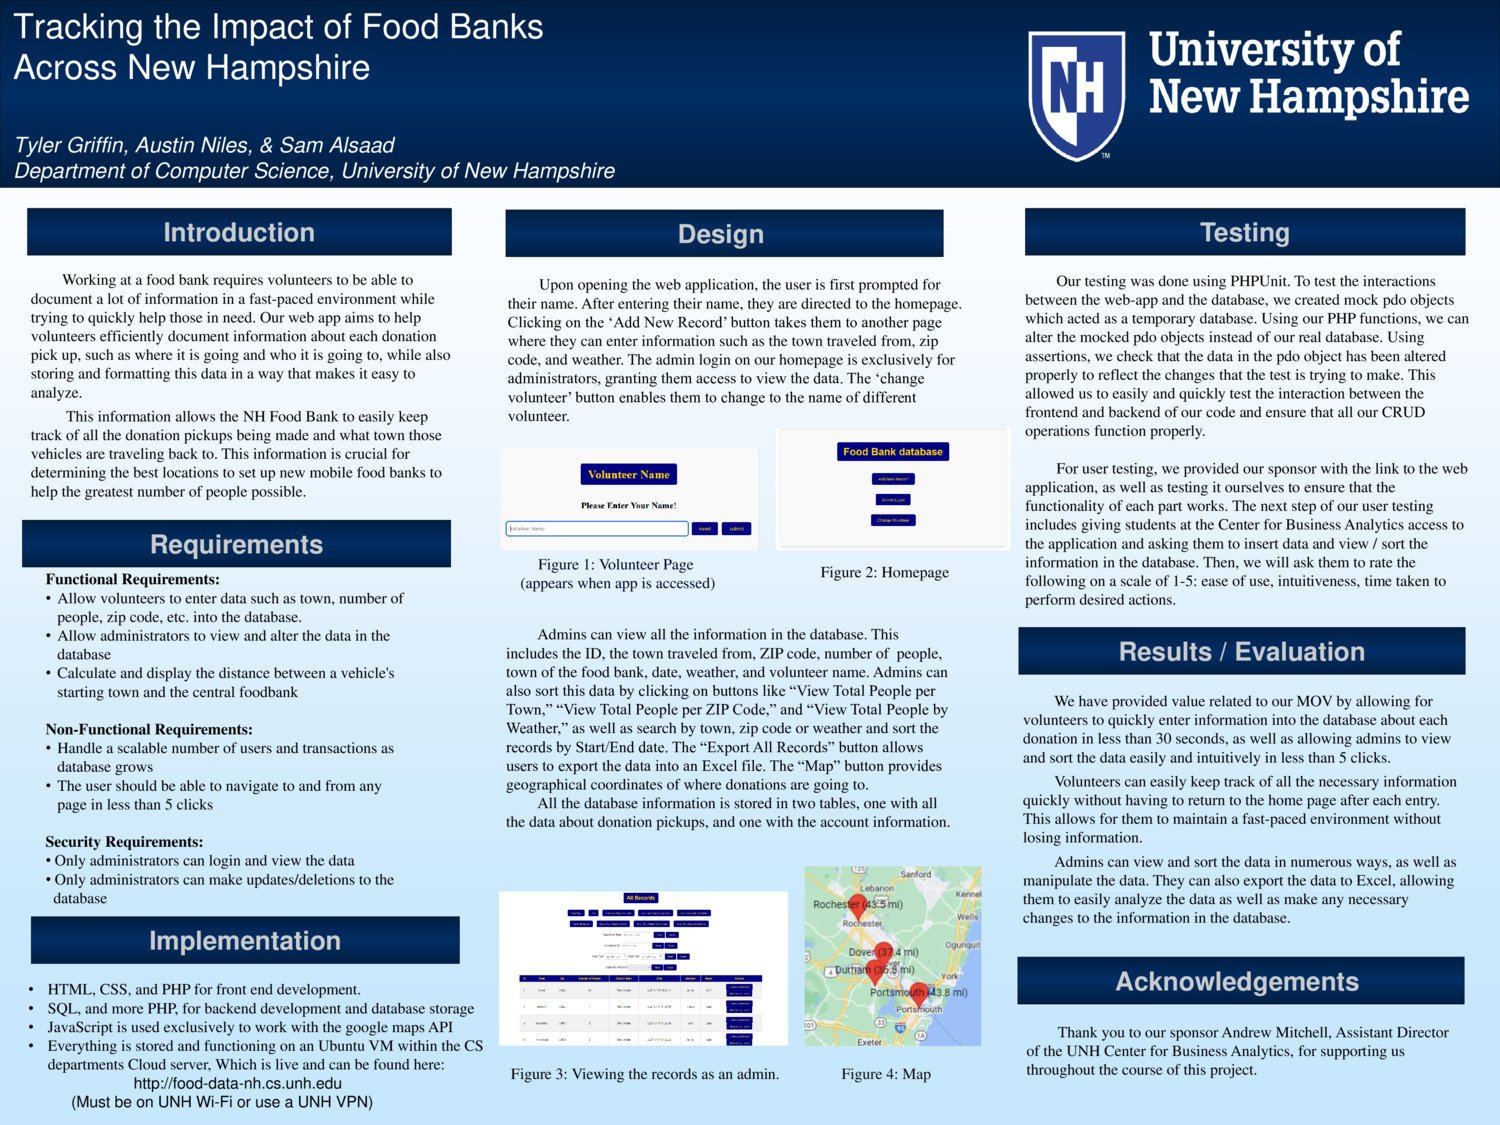 Tracking The Impact Of Food Banks Across New Hampshire by sa1421